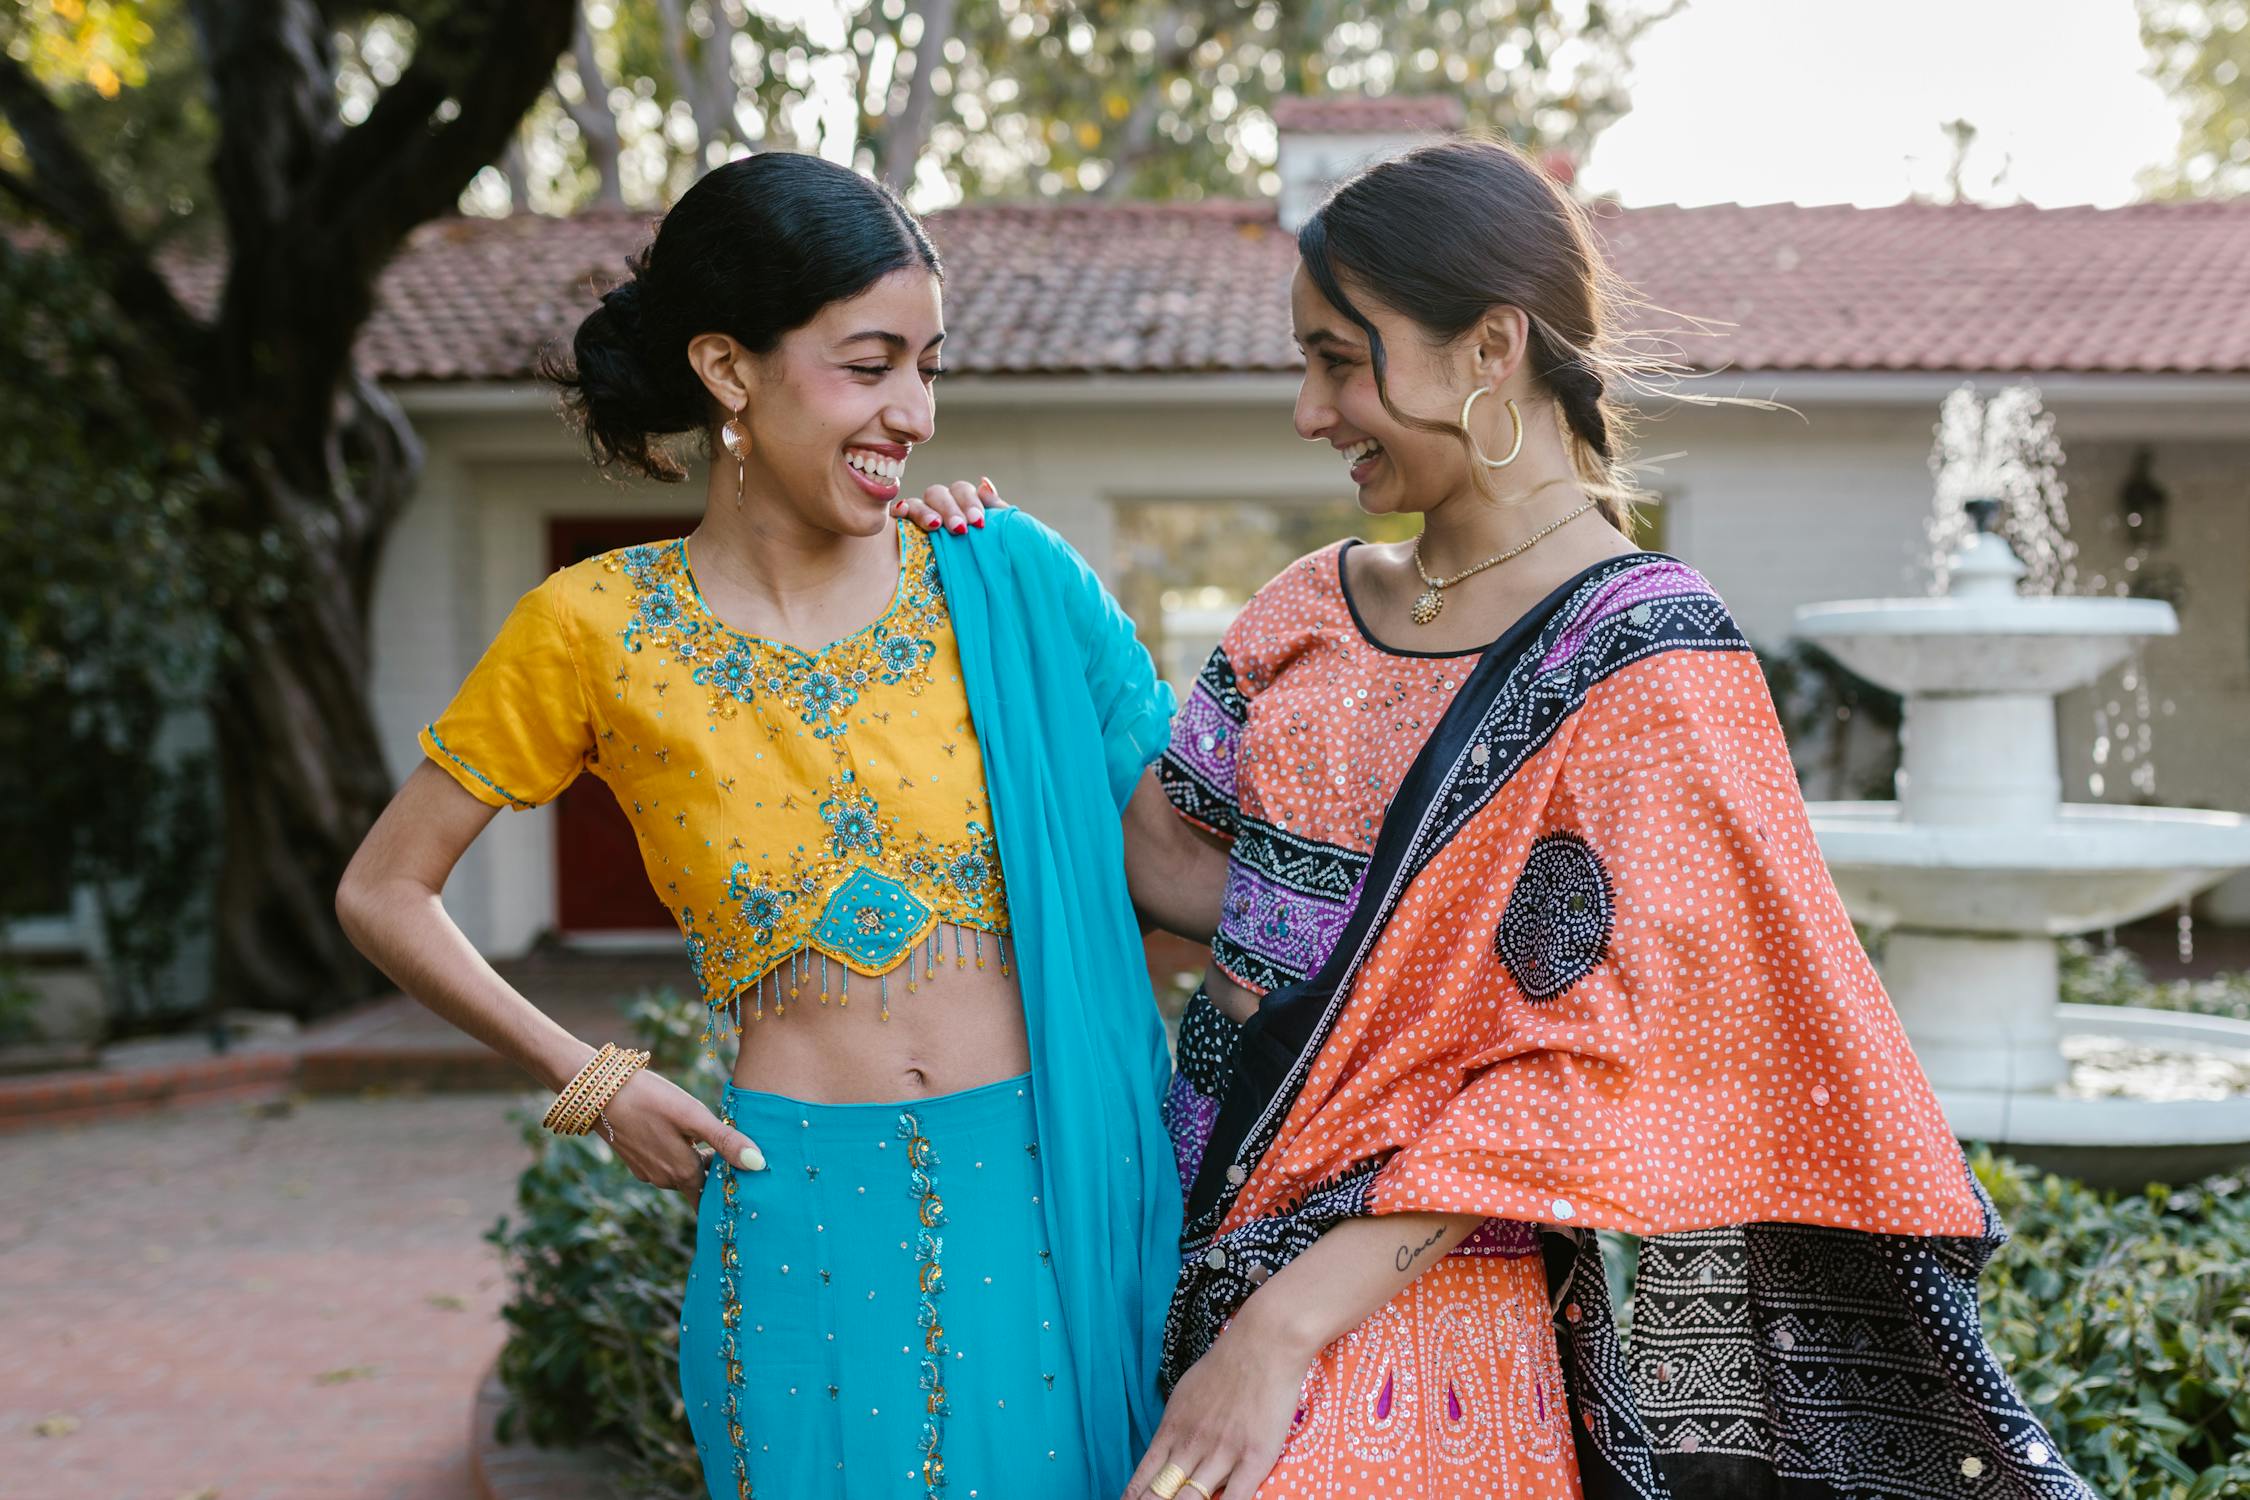 Saree Girls Photo by RODNAE Productions from Pexels: https://www.pexels.com/photo/cheerful-women-in-traditional-clothing-7685591/